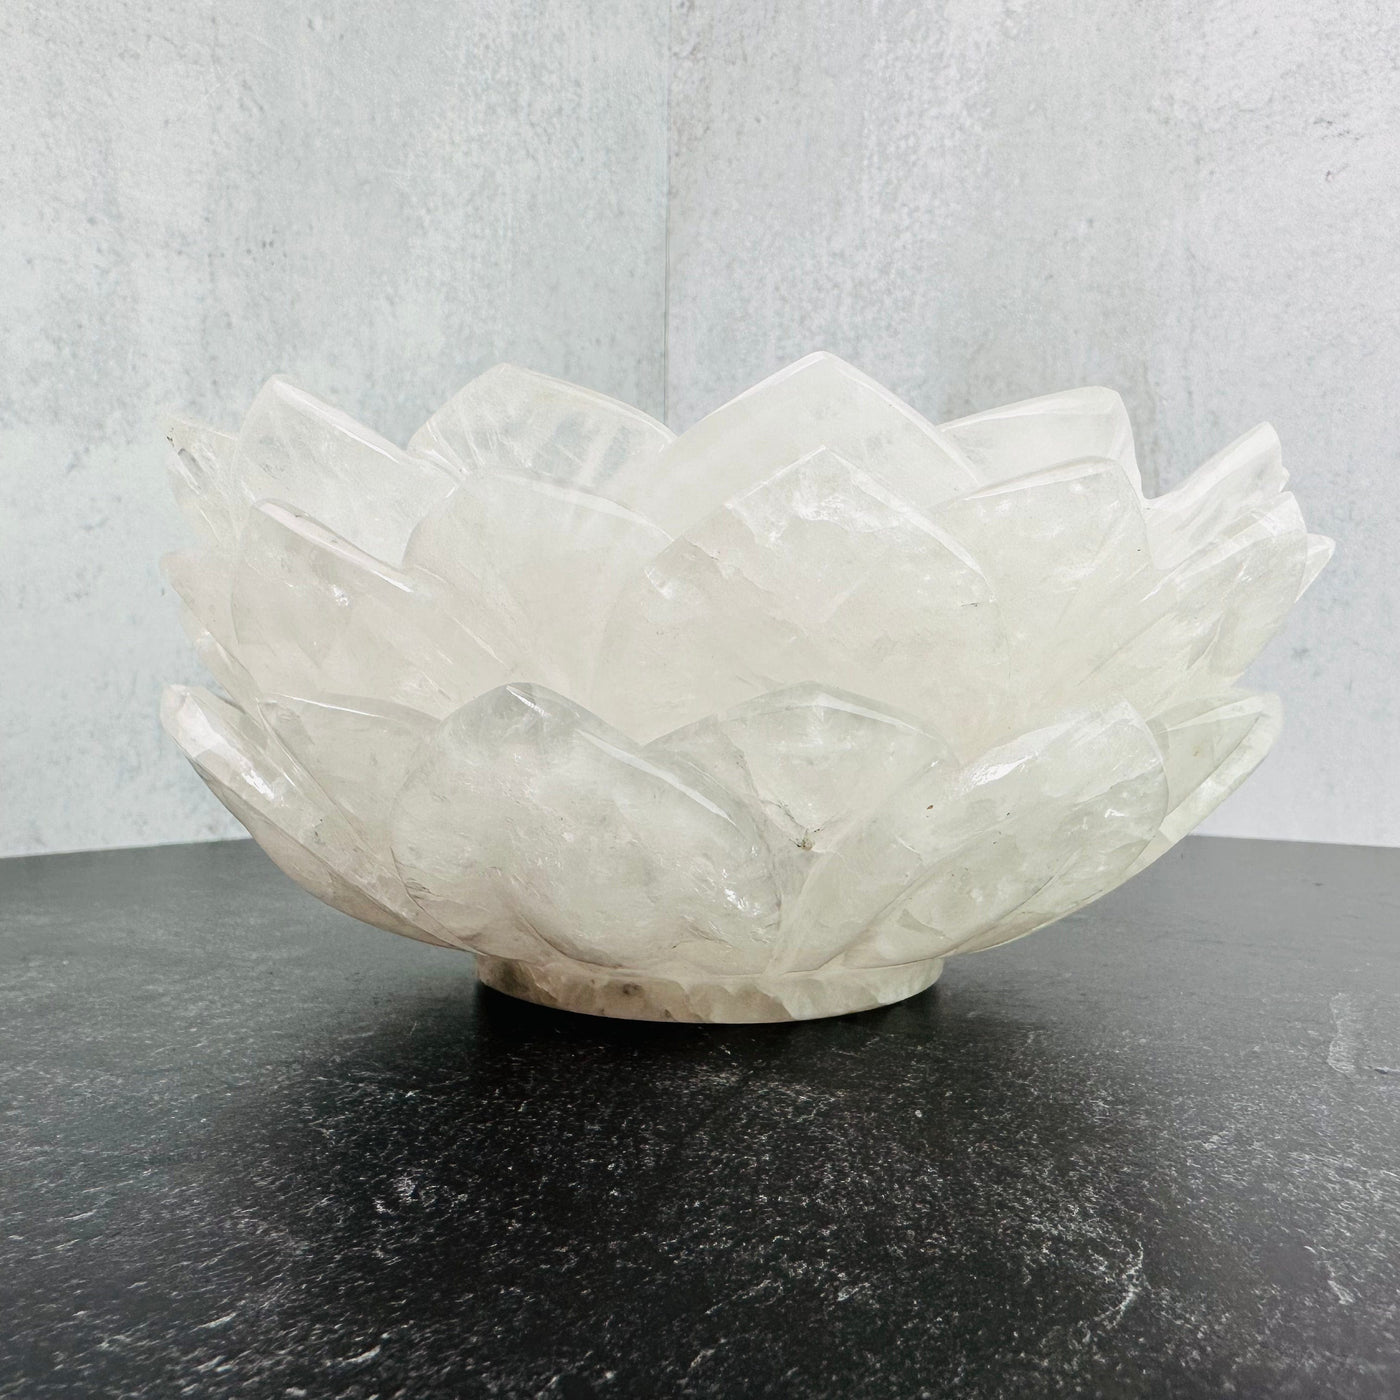 3 Crystal Quartz Lotus Bowls stacked on a black surface.